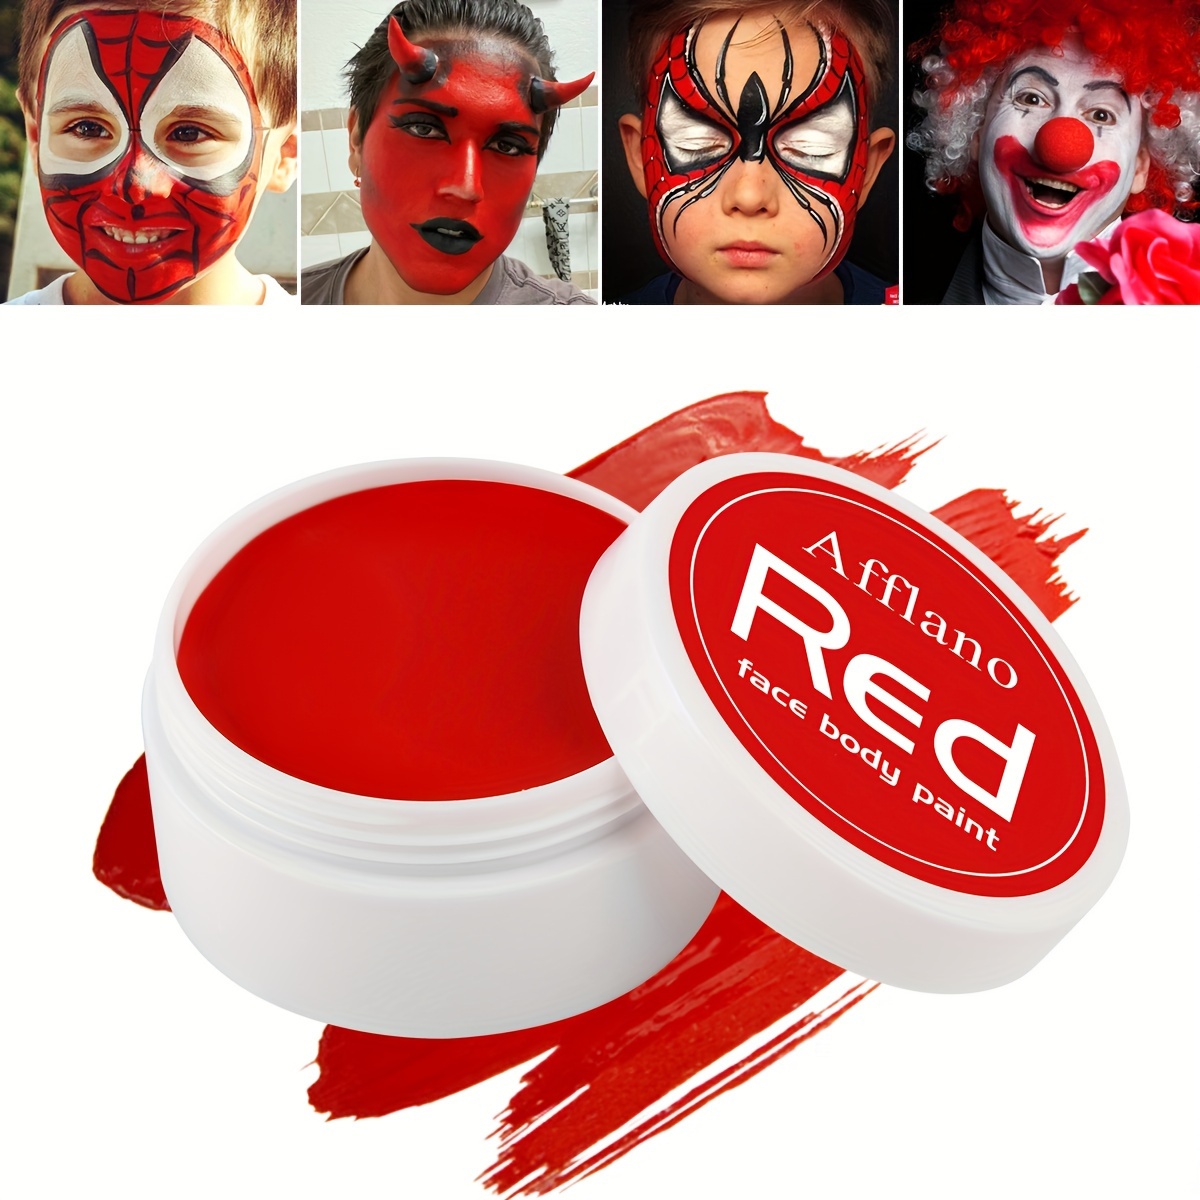 DE'LANCI Black White Red Face Body Paint, Face Painting for